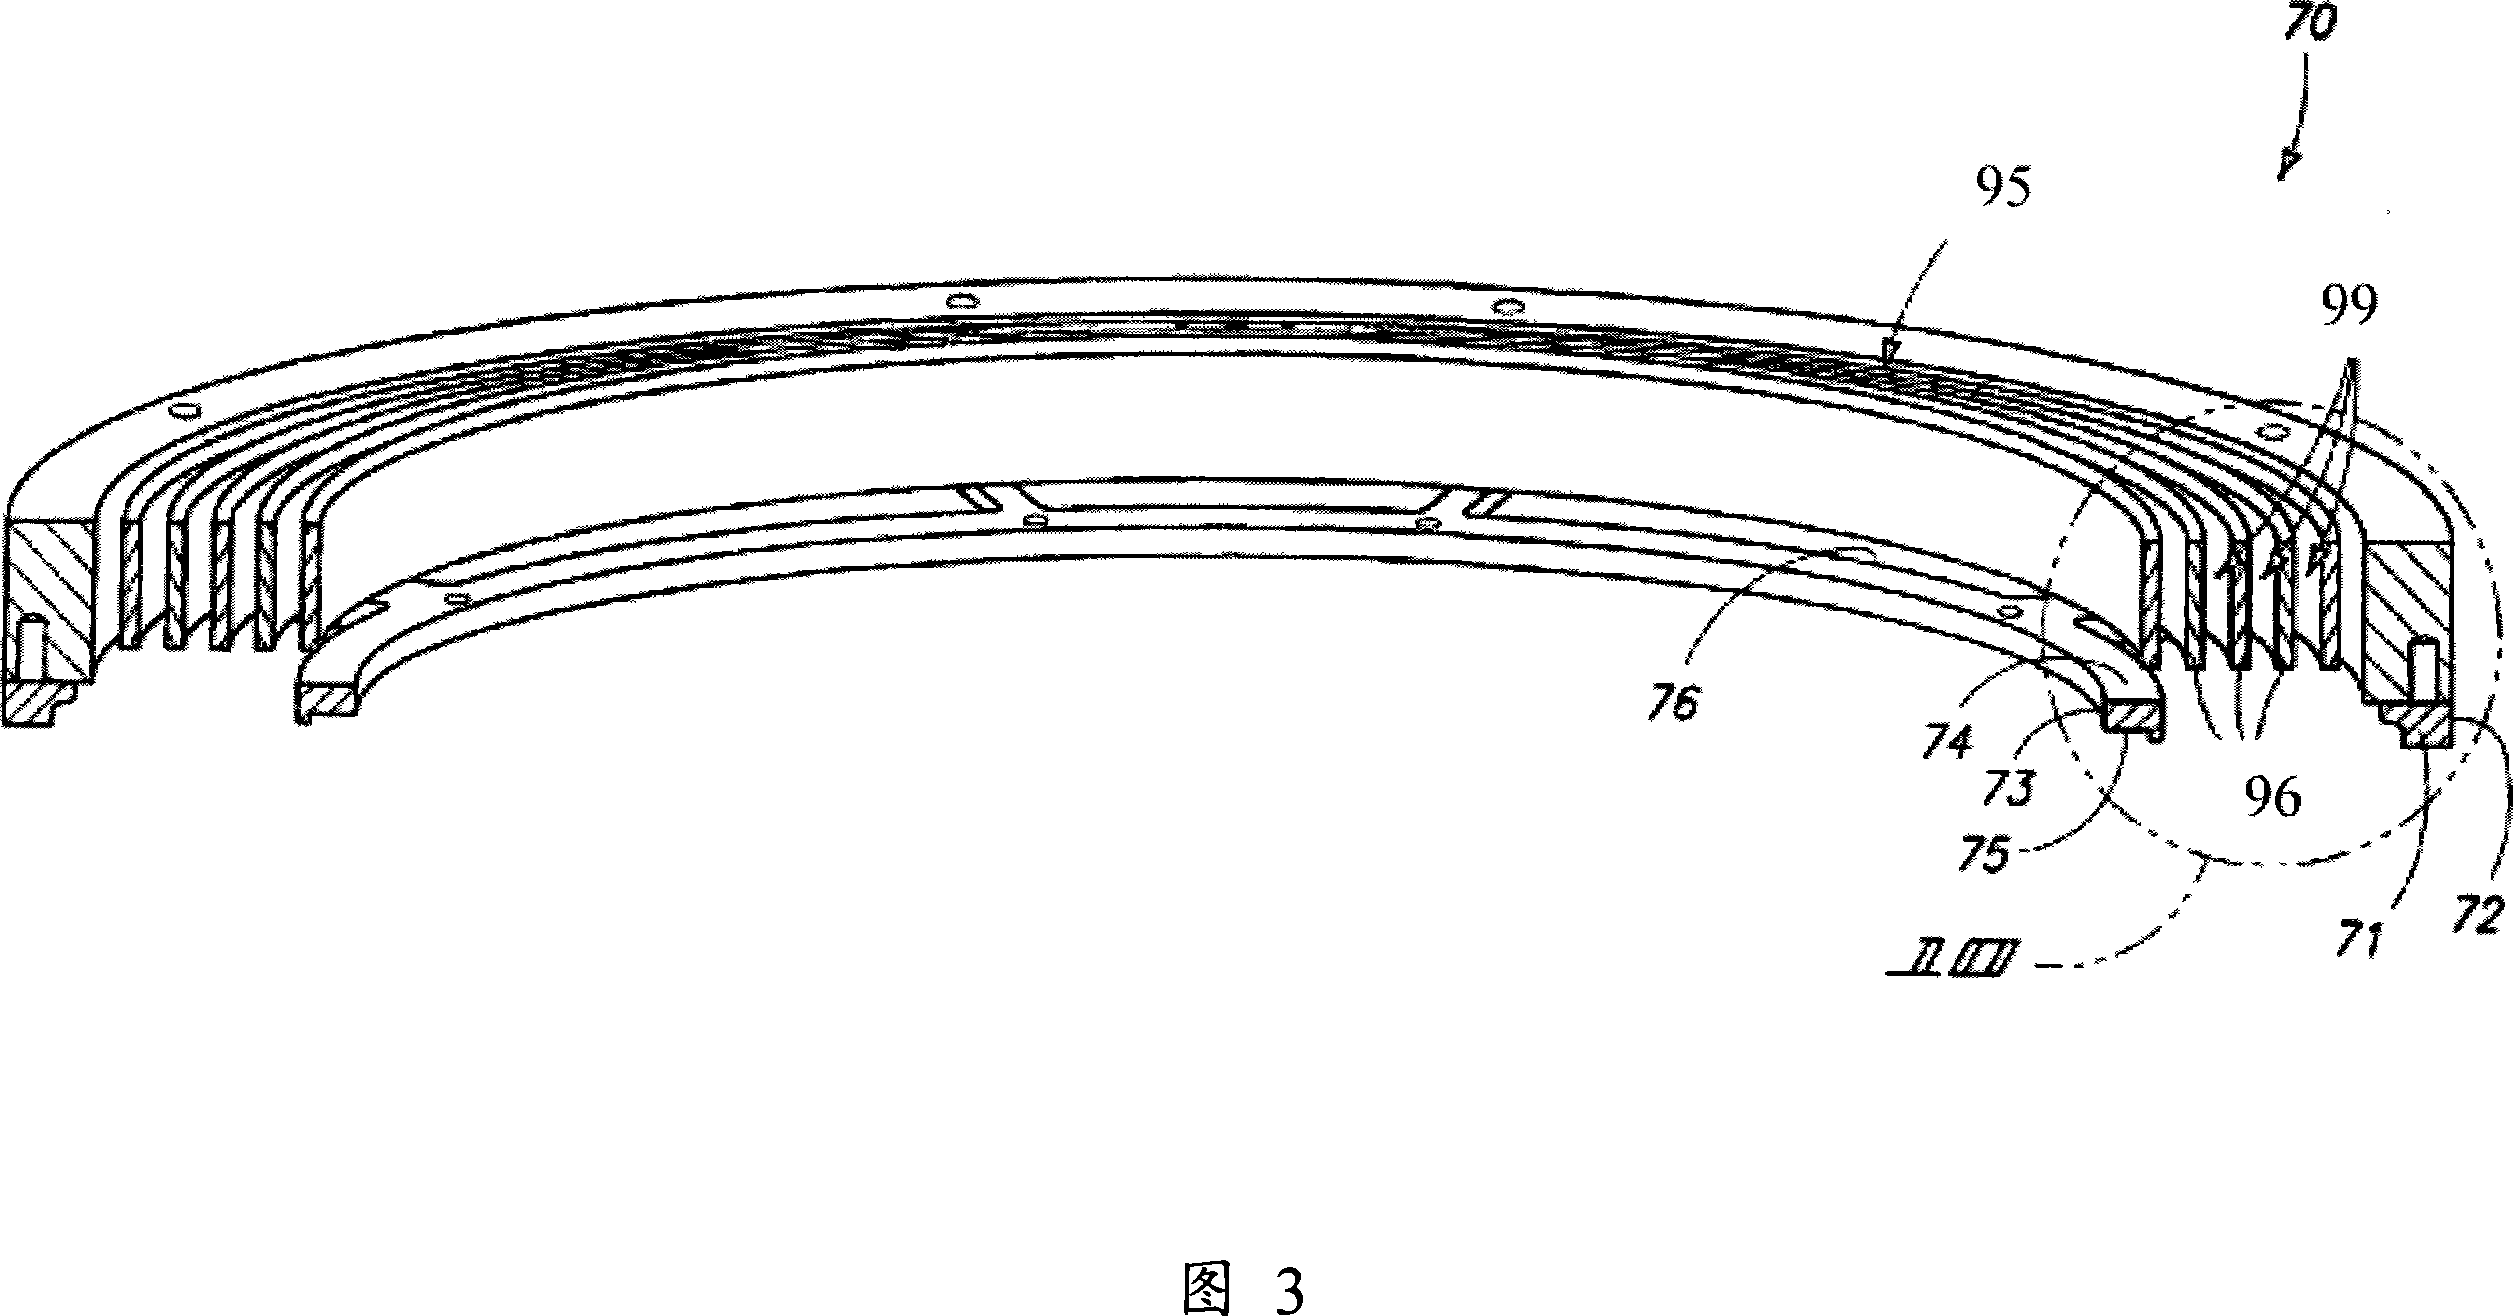 Decoupling reactive ion etching chamber containing multiple processing platforms